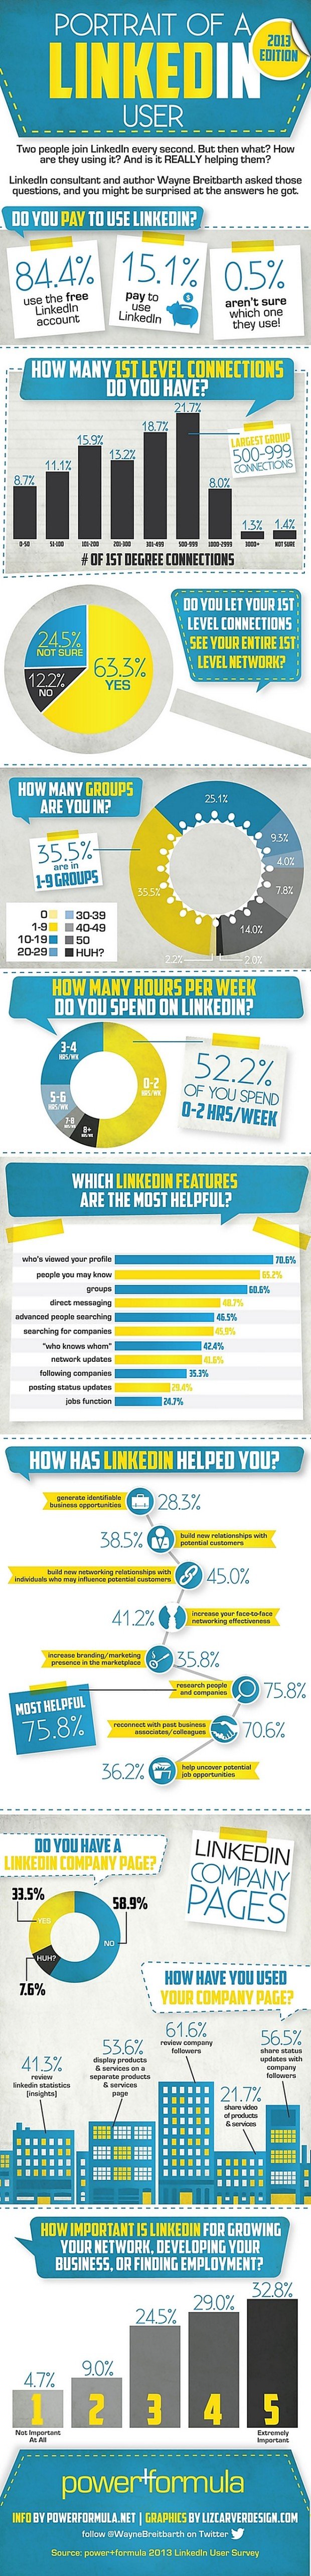 Portrait of a LinkedIn User [Infographic]